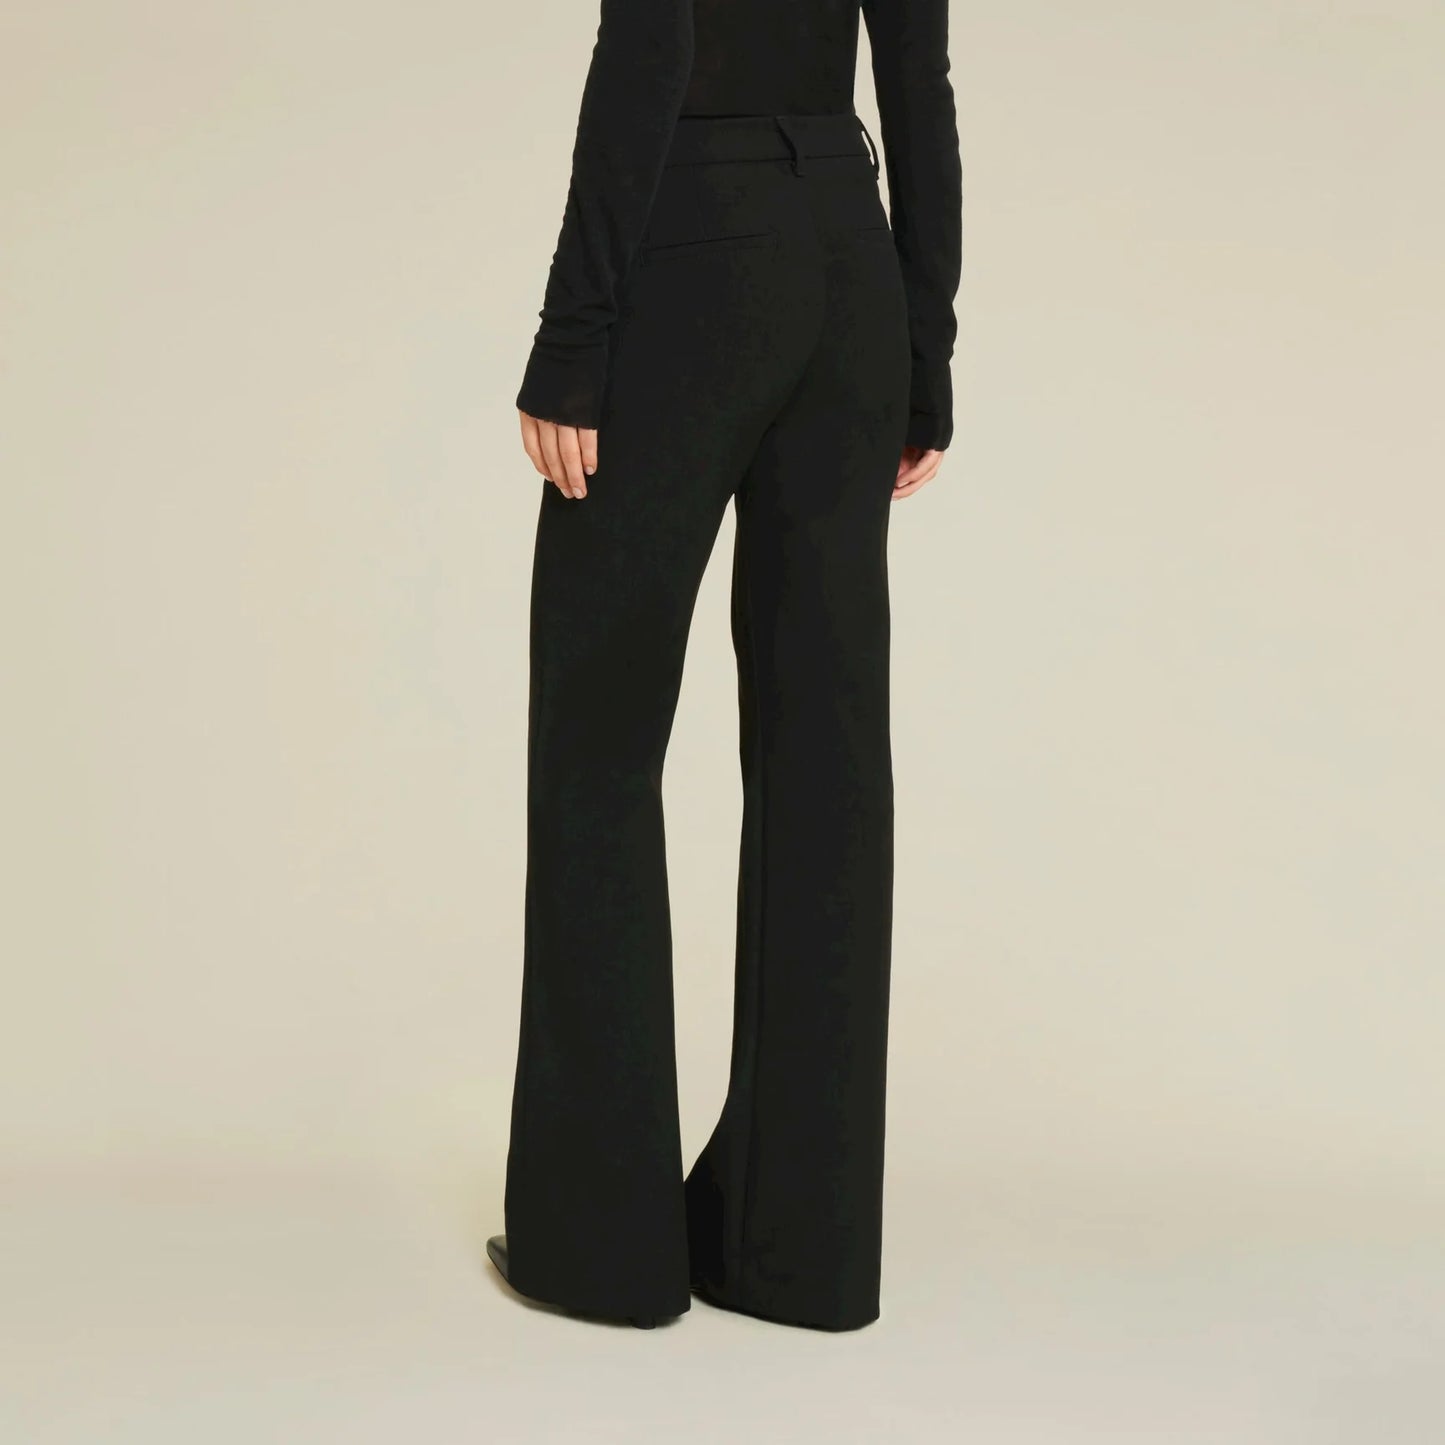 Lois Silvia Suit Roble Chapter broek